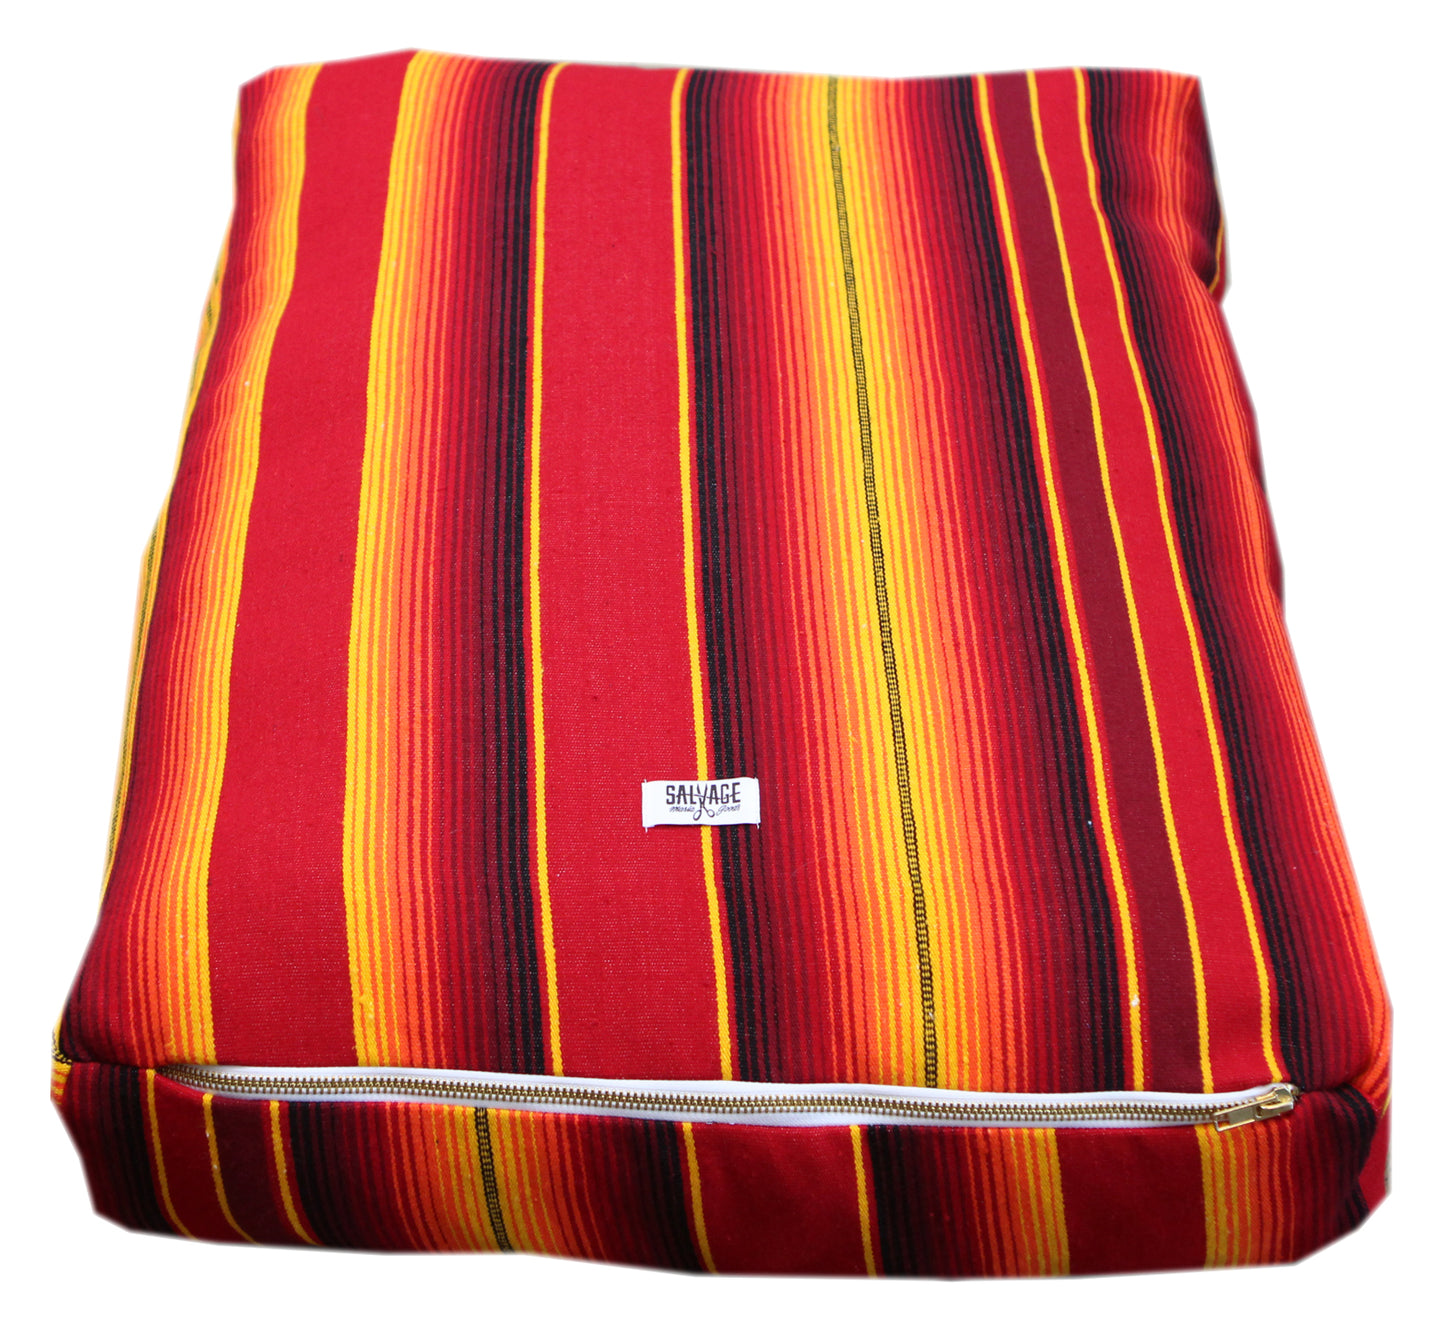 Saltillo Serape Rectangulo Cushion-Two tone Red and Yellow